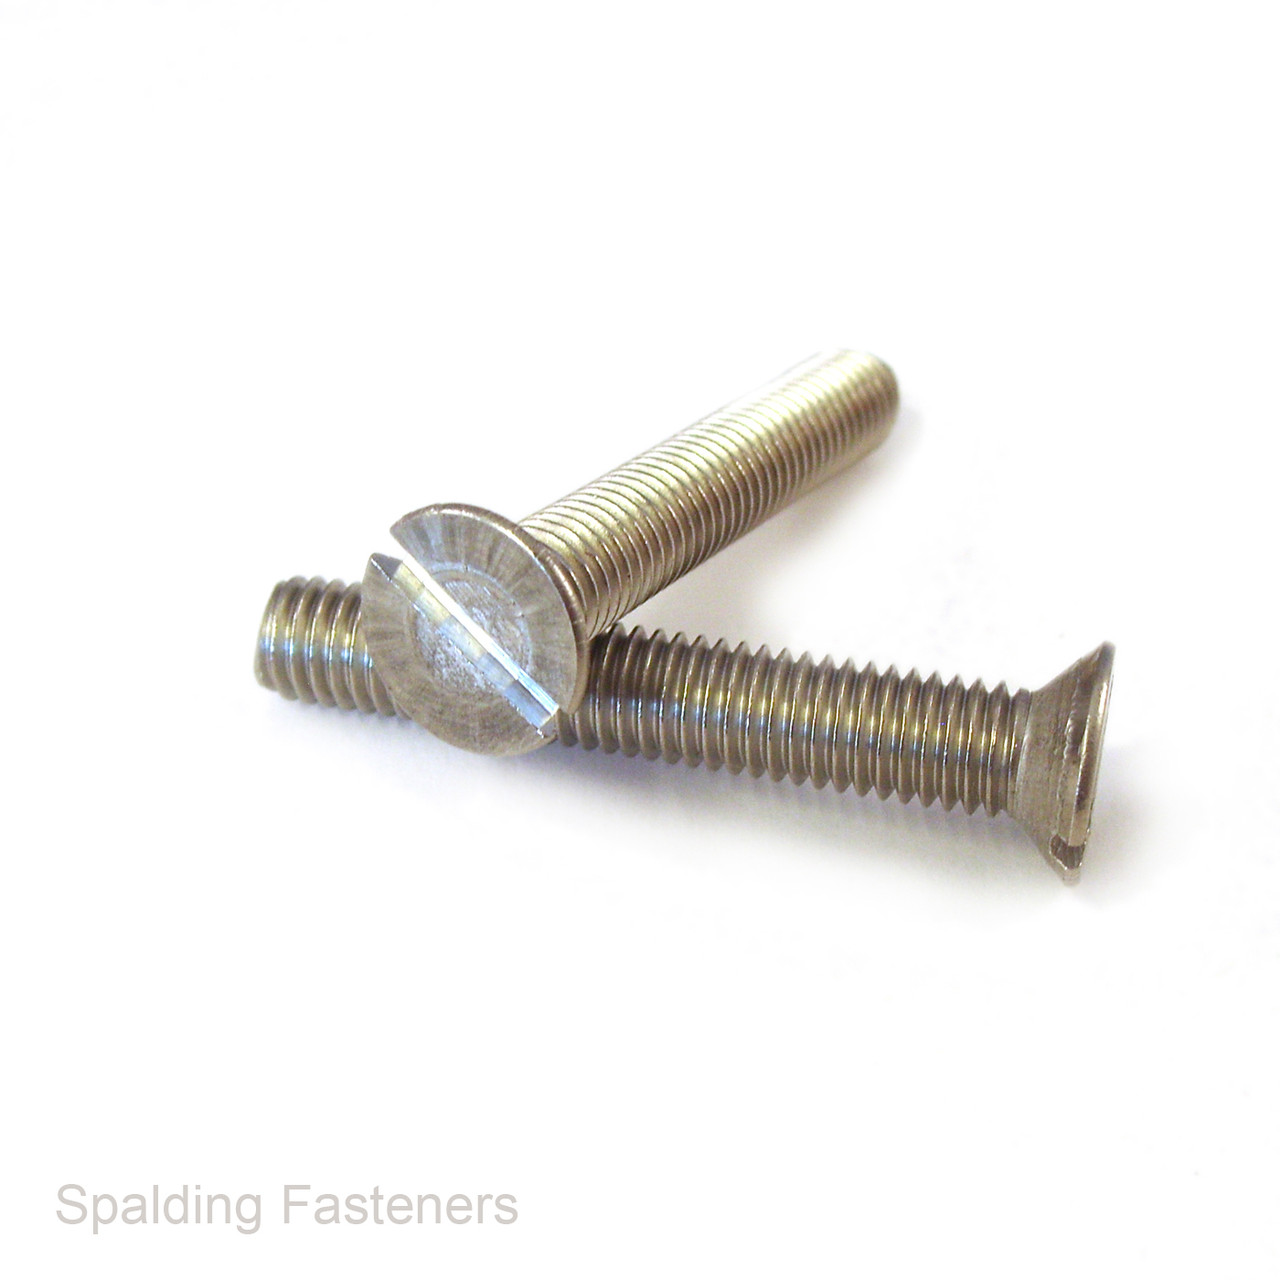 4BA A2 Stainless Steel Countersunk Slotted Head Machine Screws